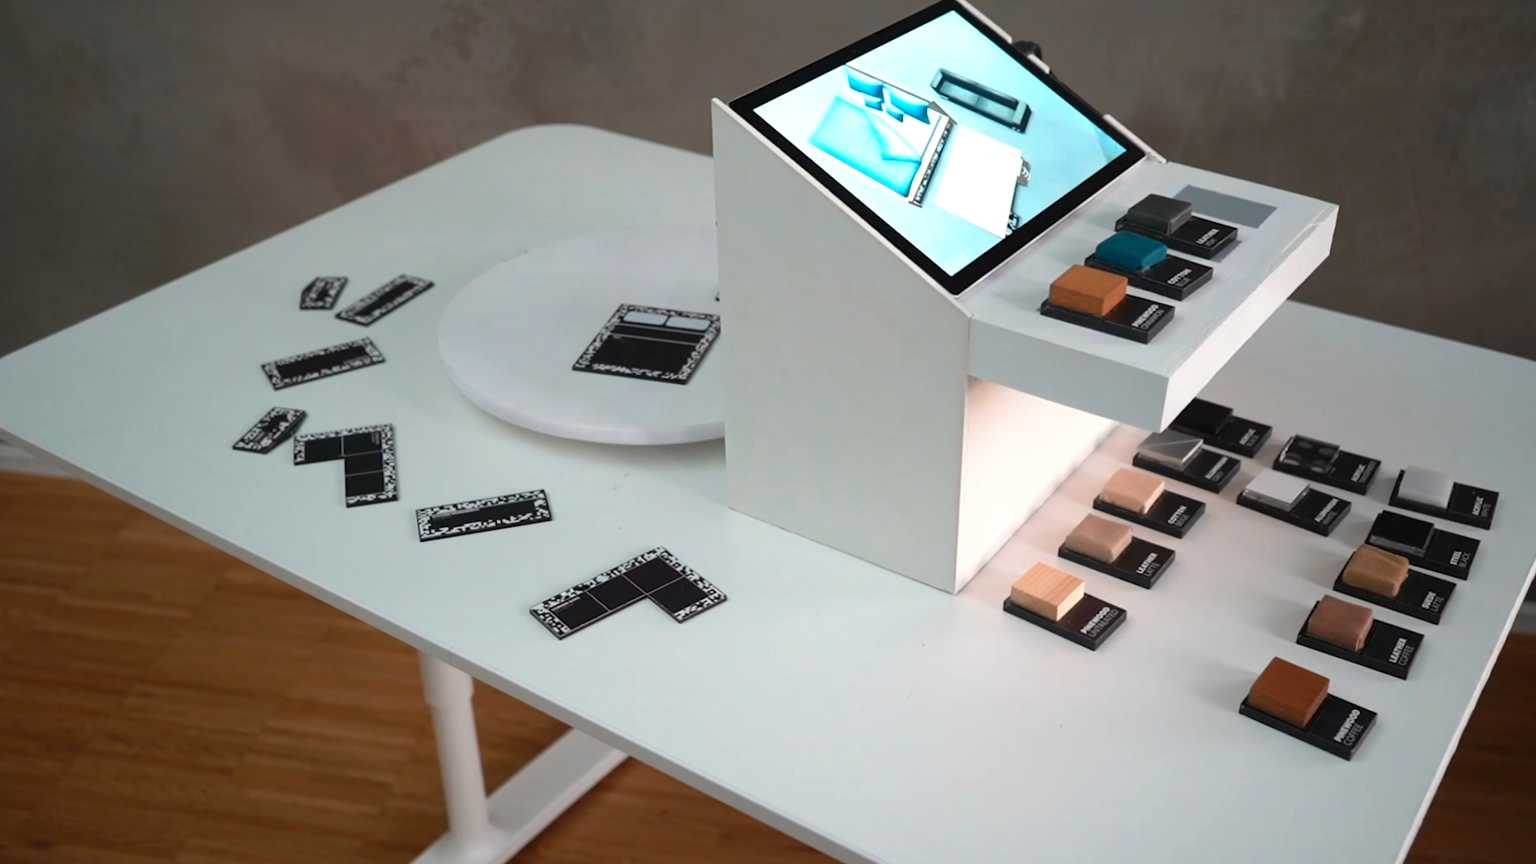 Formloupe's 3D, physical interface on a table.